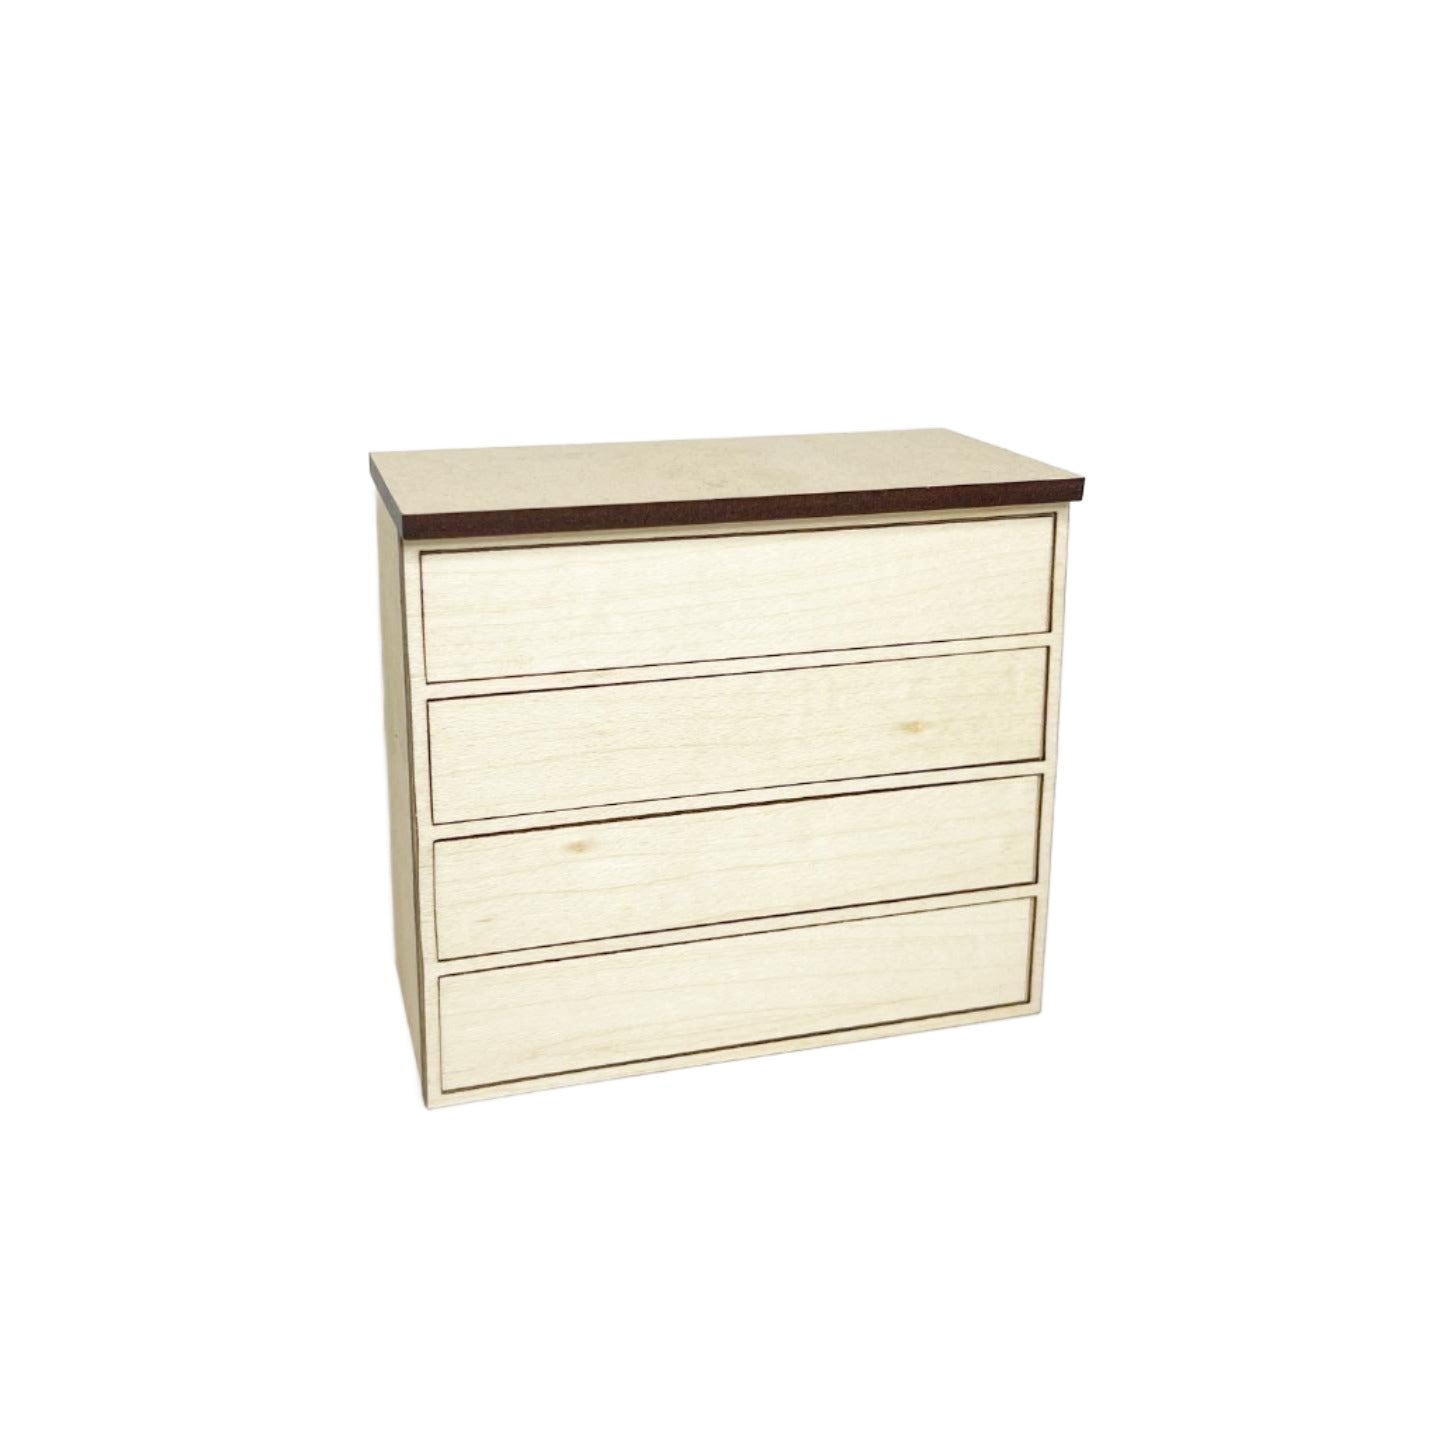 Double Lower Cabinet with 4 Drawers, Standard